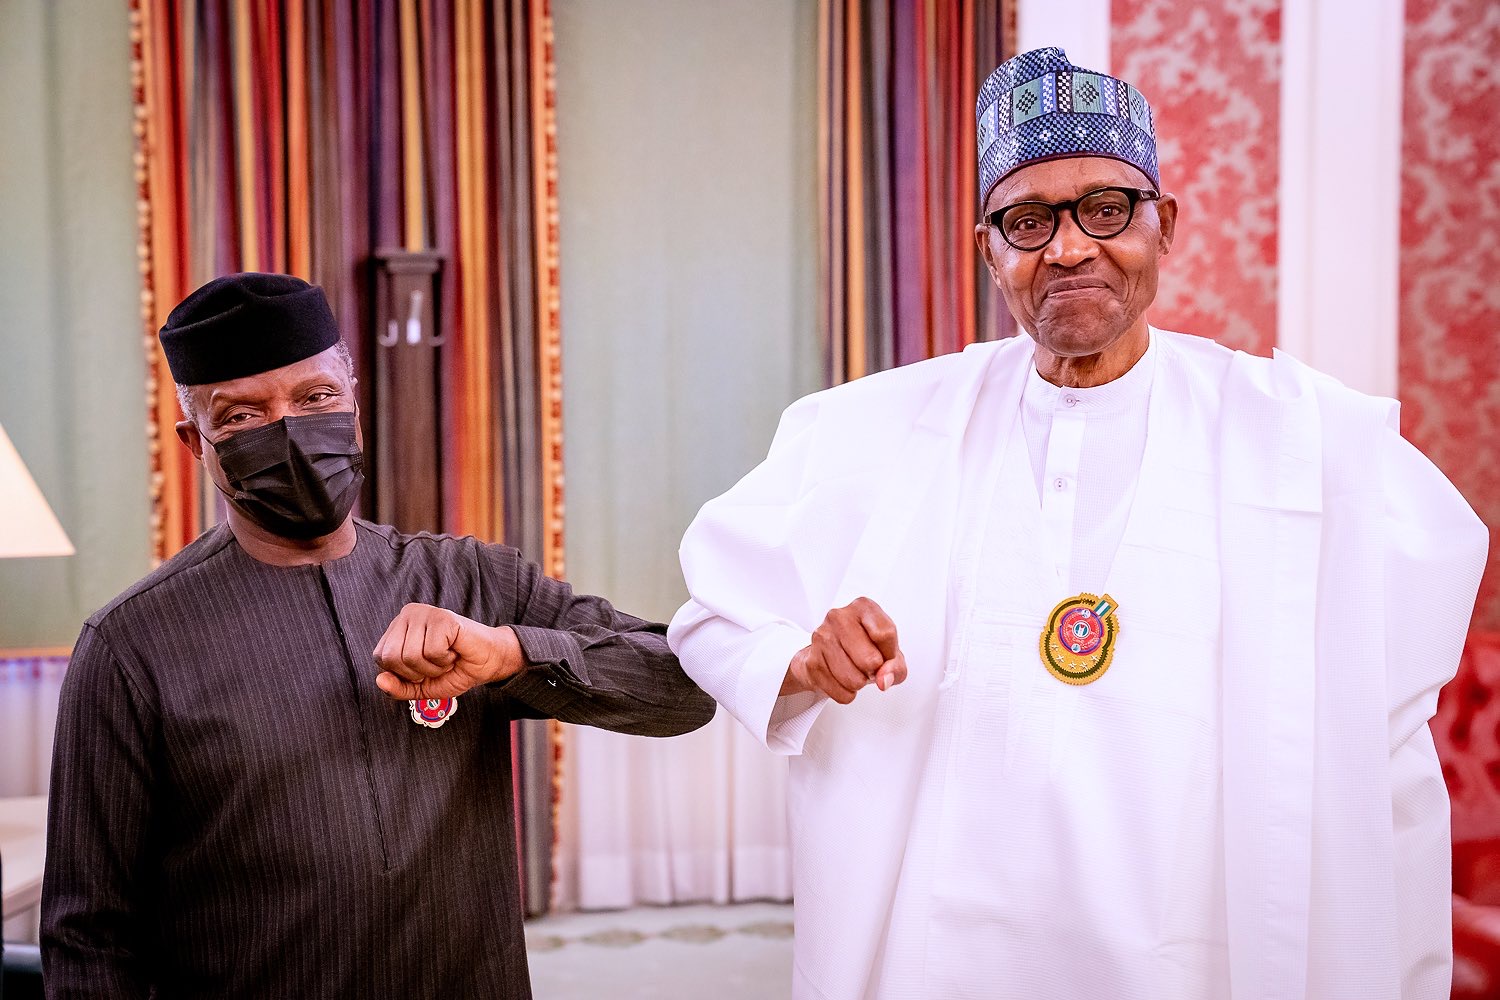 Just In: Buhari, Osinbajo To Be Vaccinated Publicly On Saturday